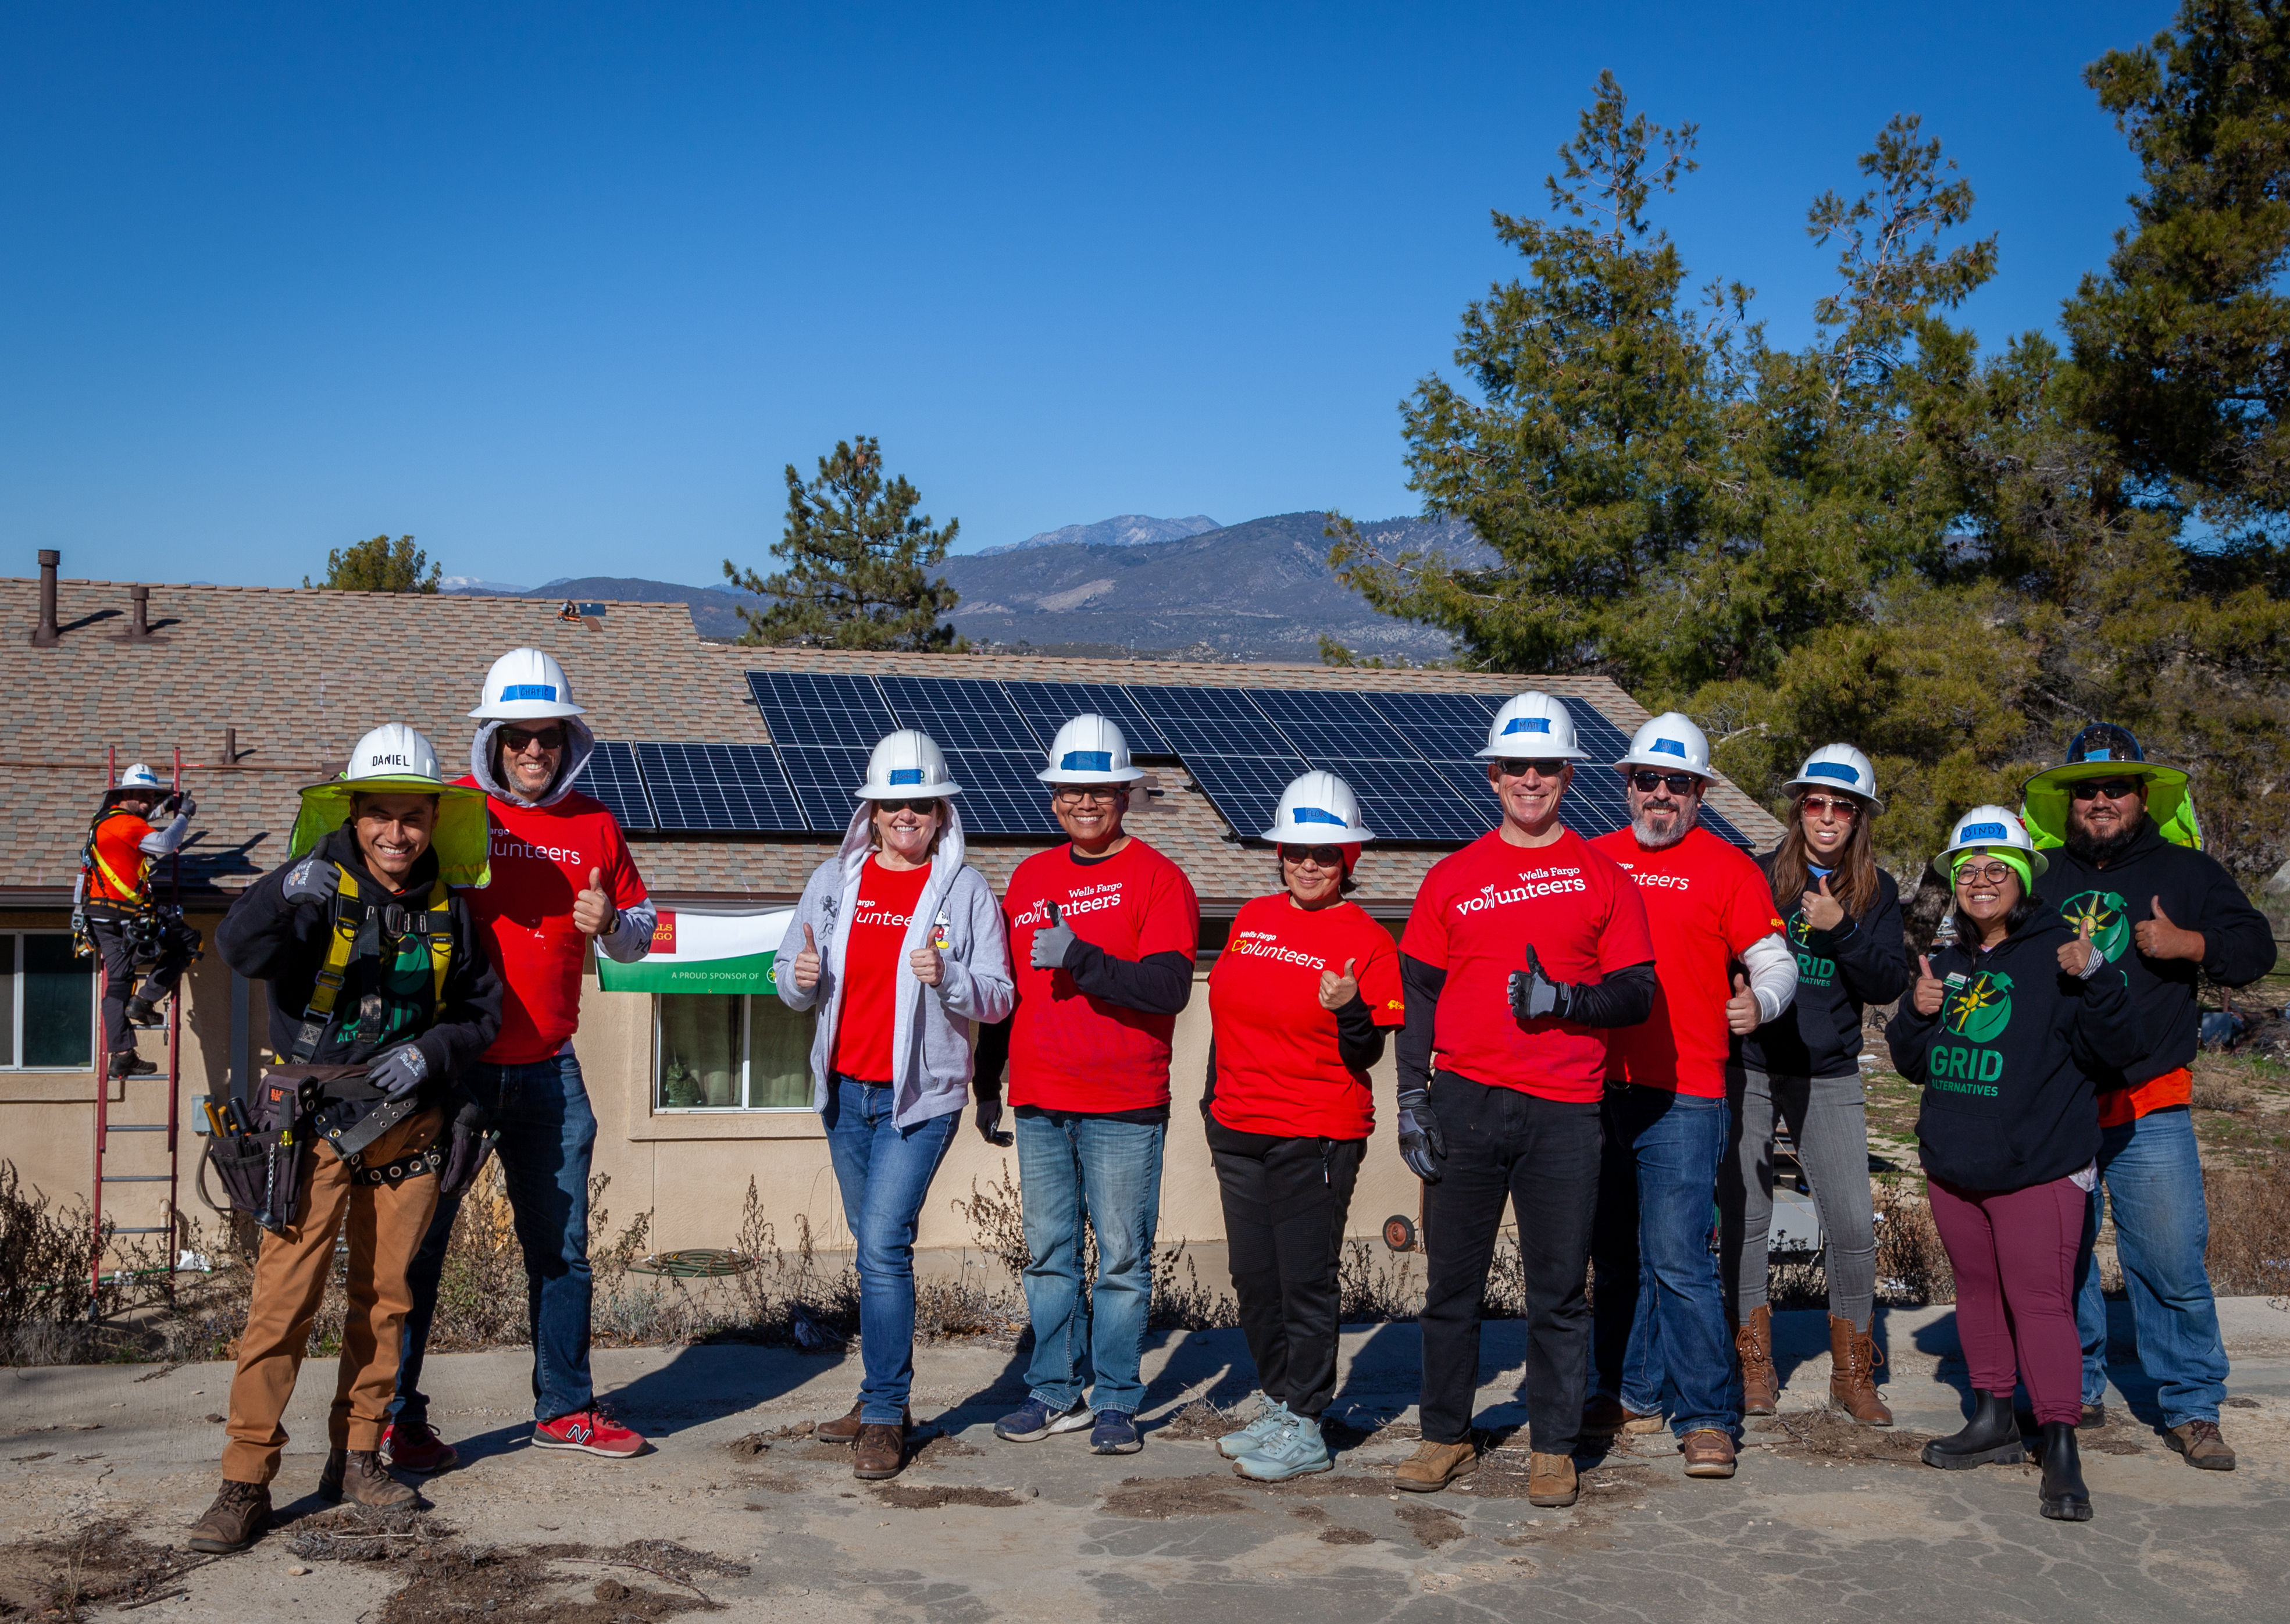 The GRID IE and Wells Fargo Volunteer Team in Anza after completing the installation